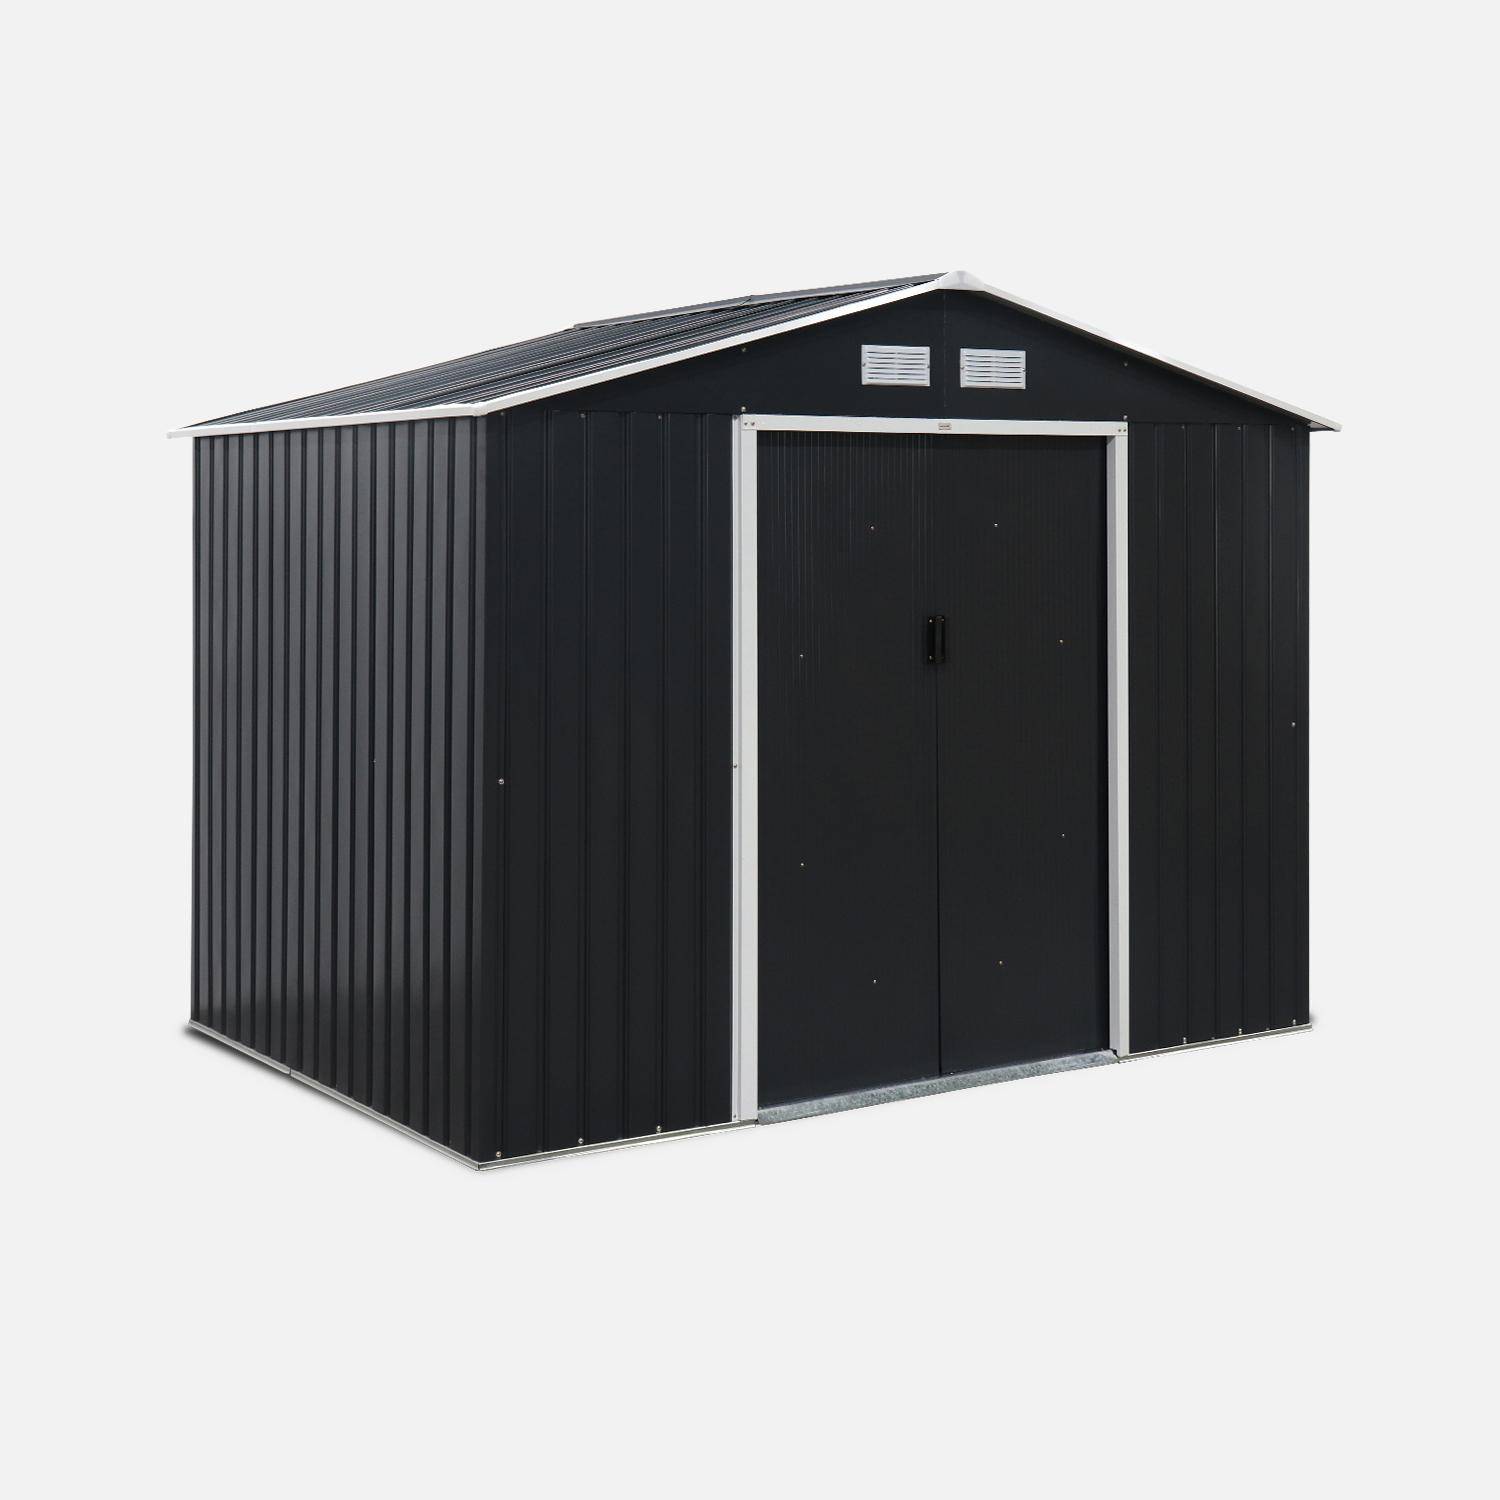 (9 X 6FT) 5.39m² Metal garden shed - Tool shed with single latch door, ground fixing kit supplied - Ferrain - Grey and White,sweeek,Photo2